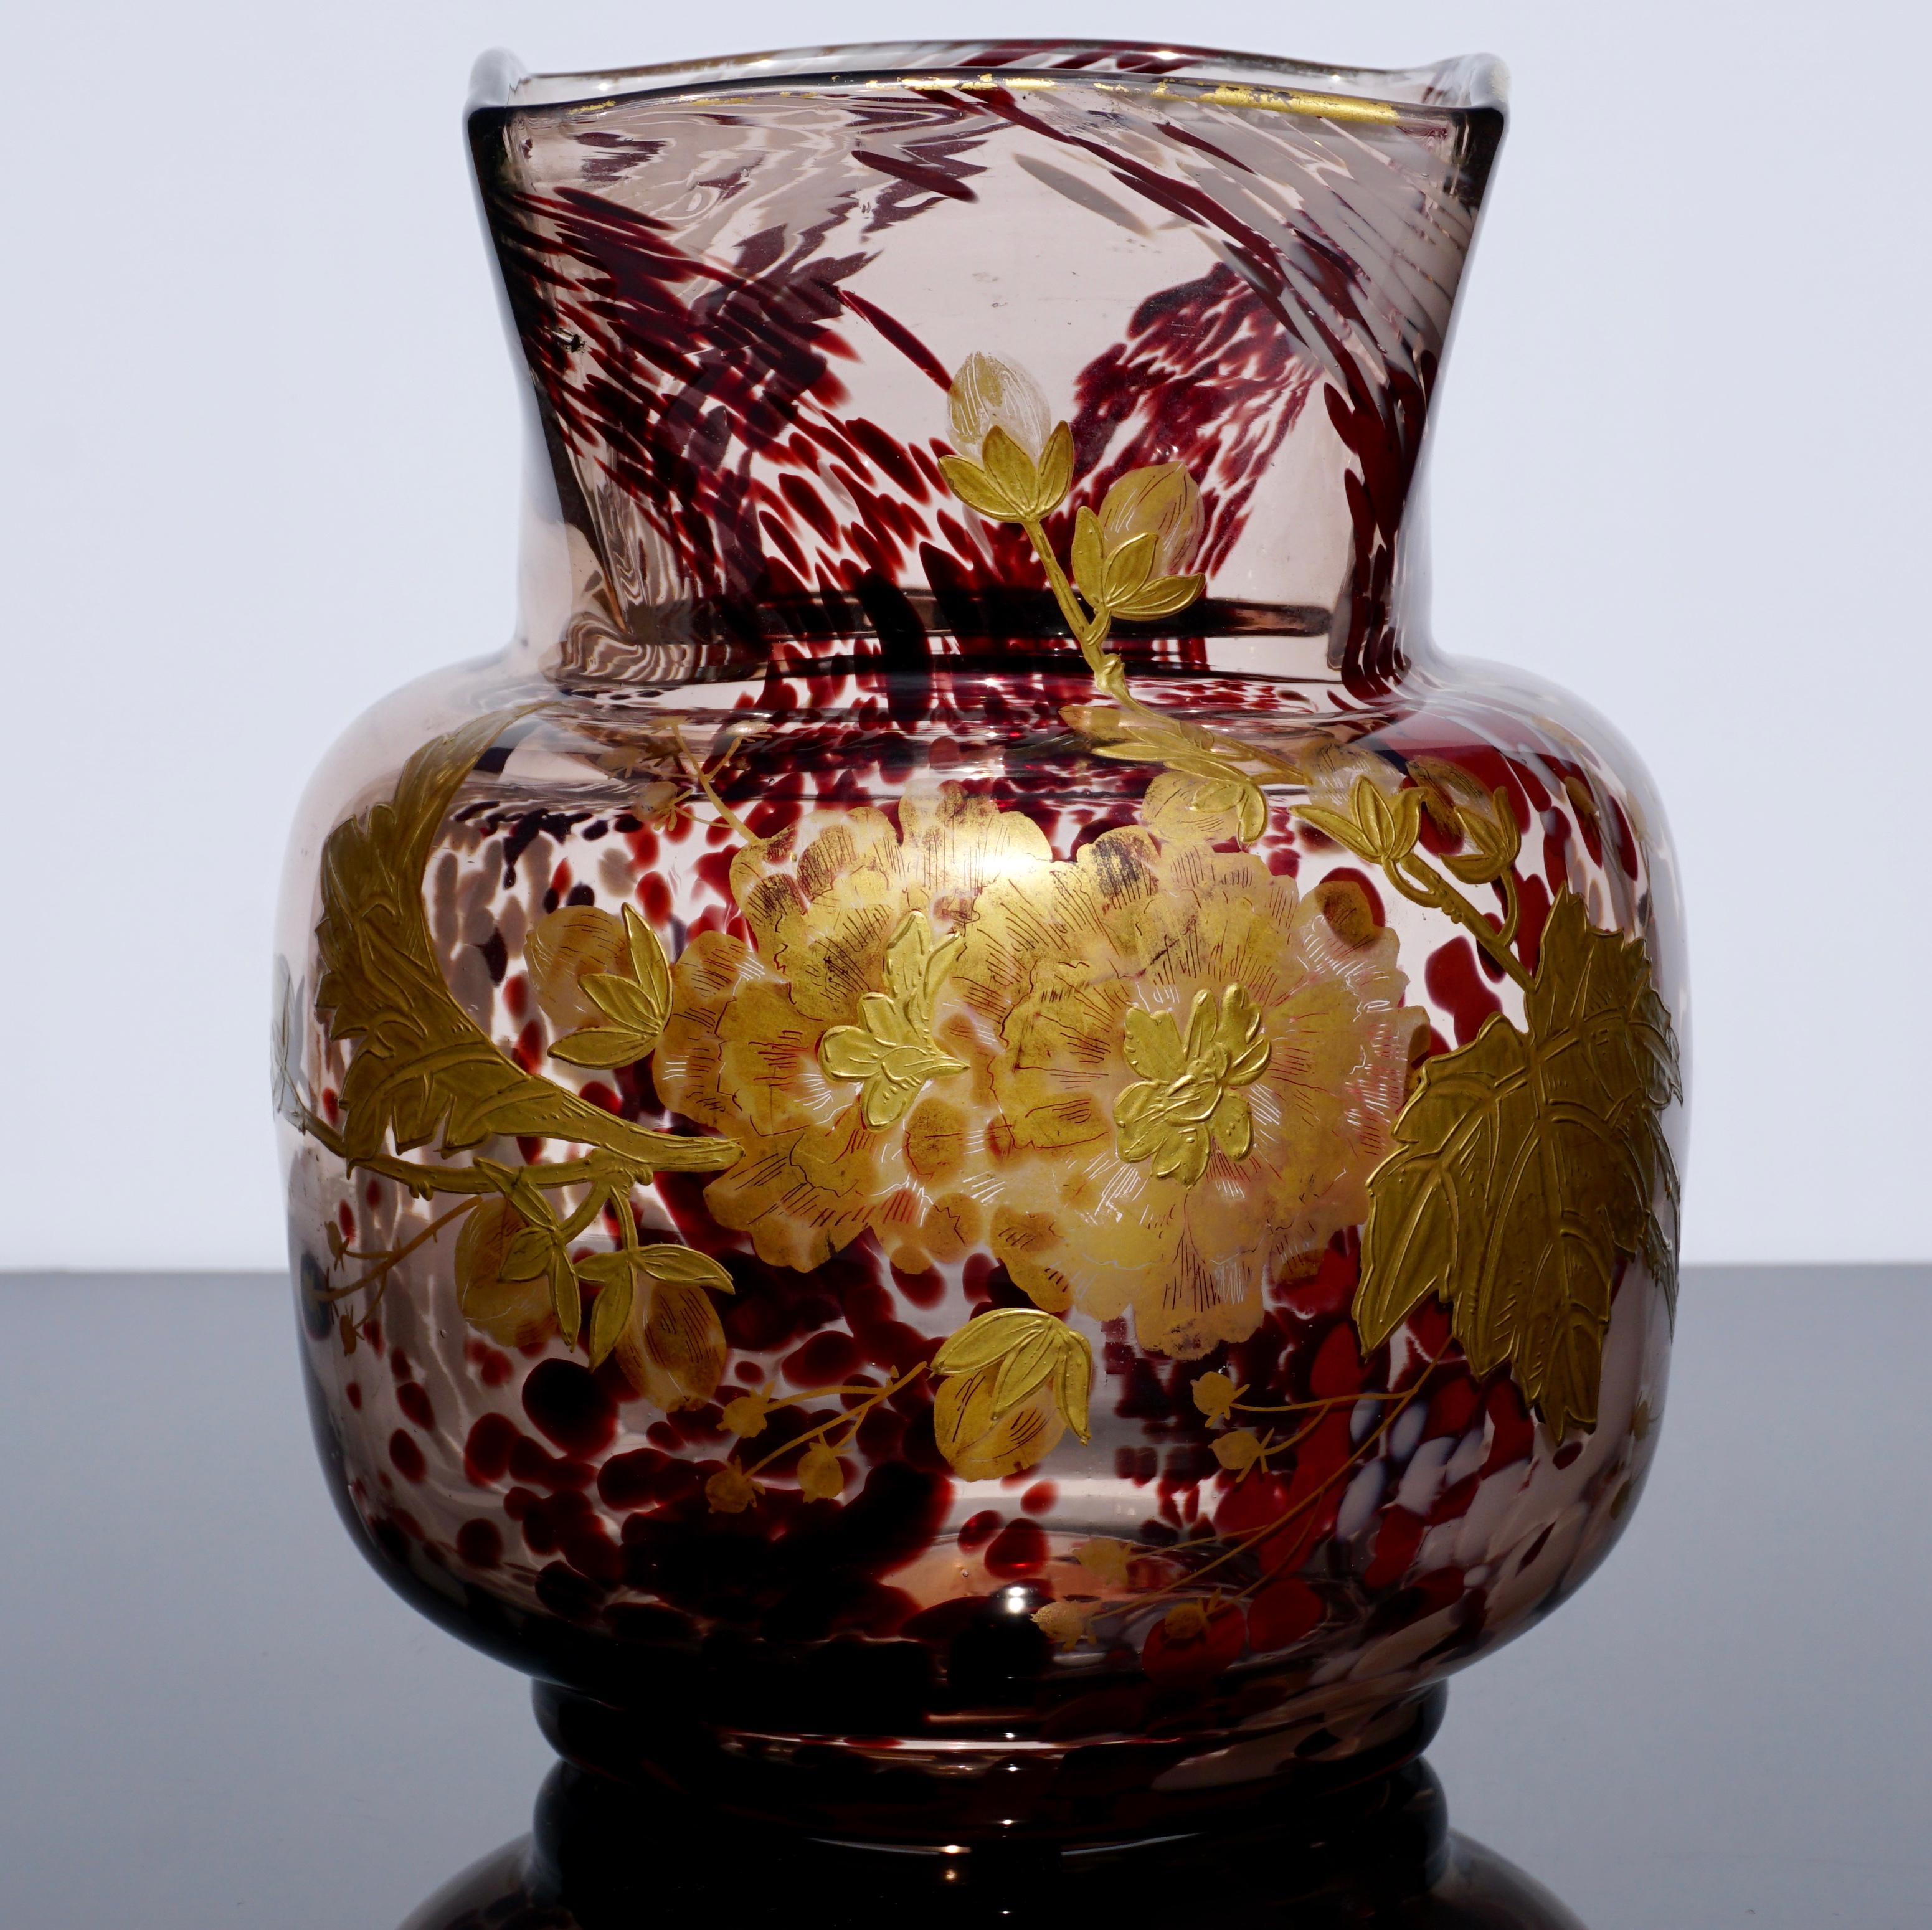 These vase are hidden gems in the art glass world as they are never signed. Made by Earnst Leveille in collaboration with Eugene Rouseau in Paris, circa 1900; this vase in glass blown with mottled inclusions on milky white, orange red and dark